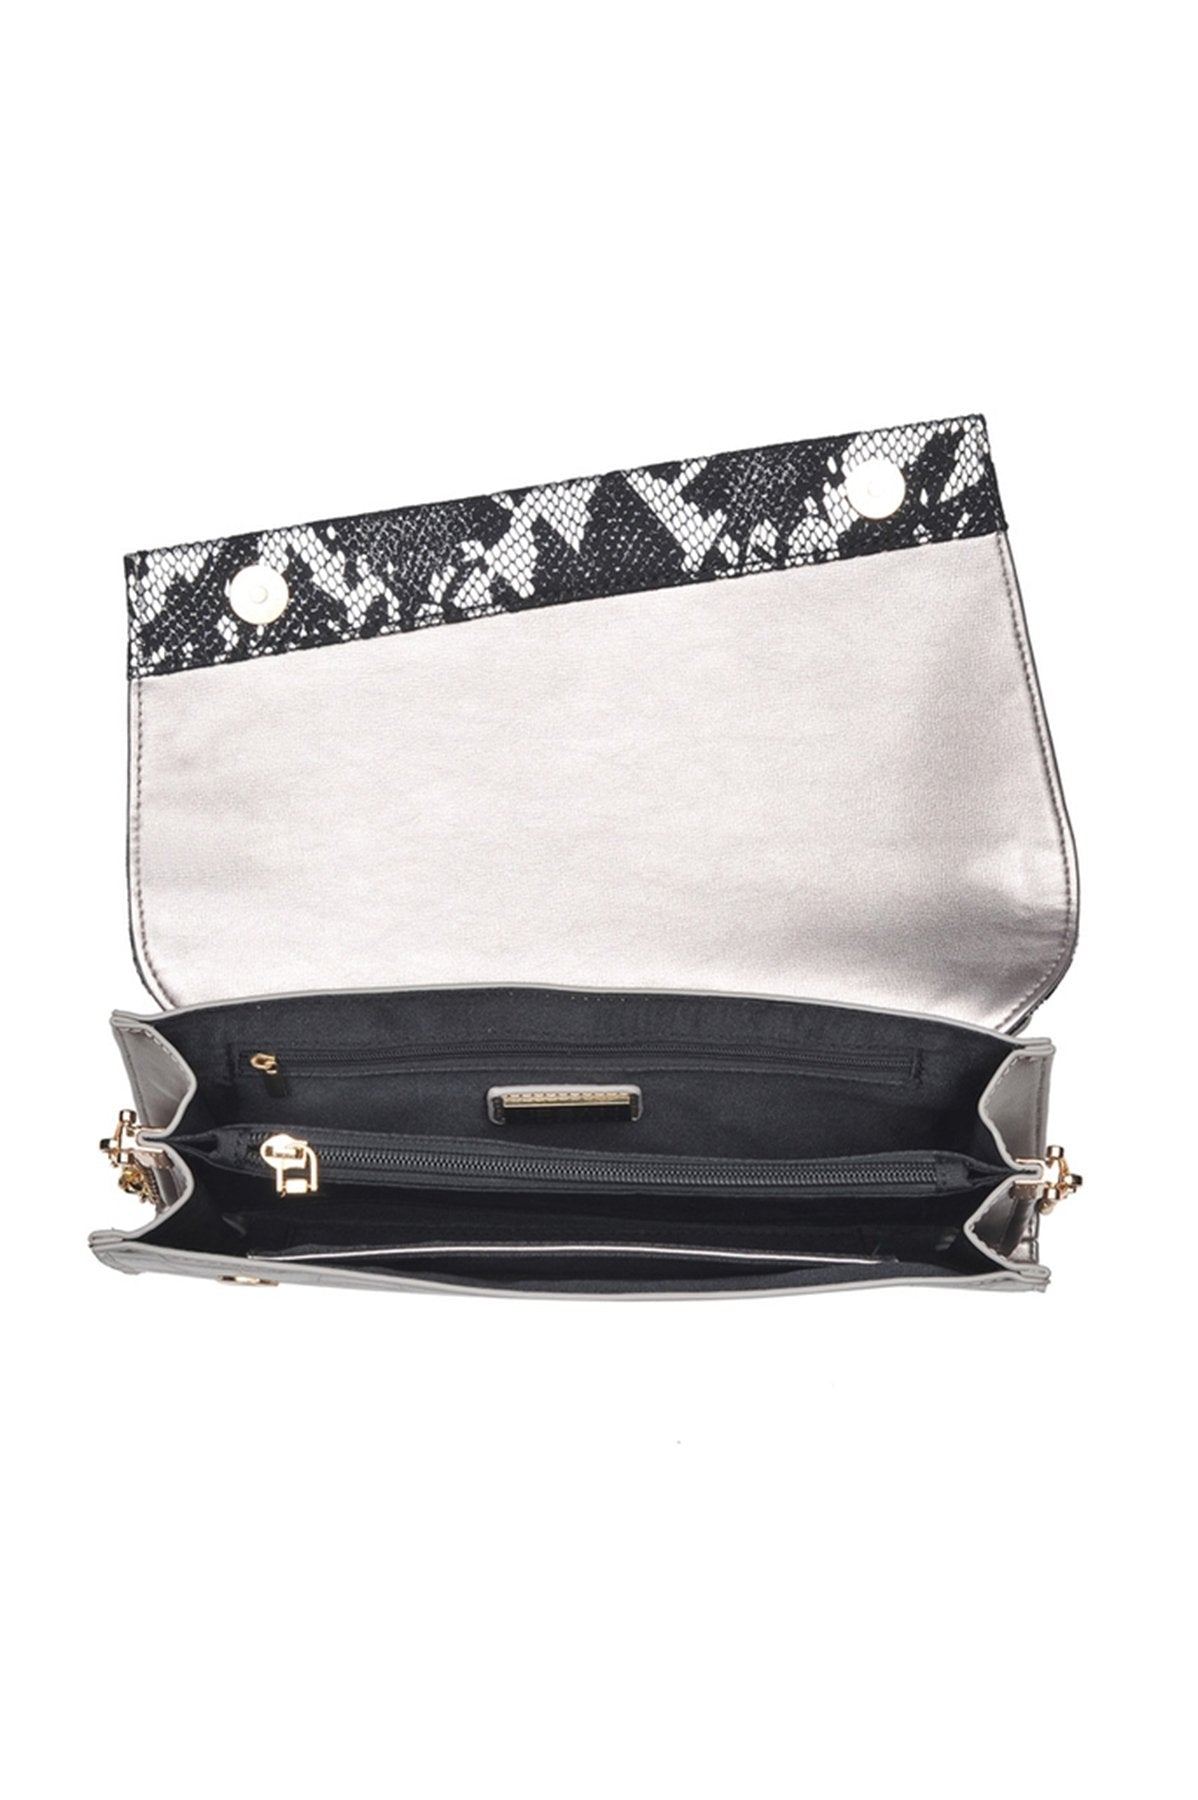 VERONICA EMBOSSED FOLDOVER CROSSBODY CLUTCH BAG URBAN EXPRESSIONS 